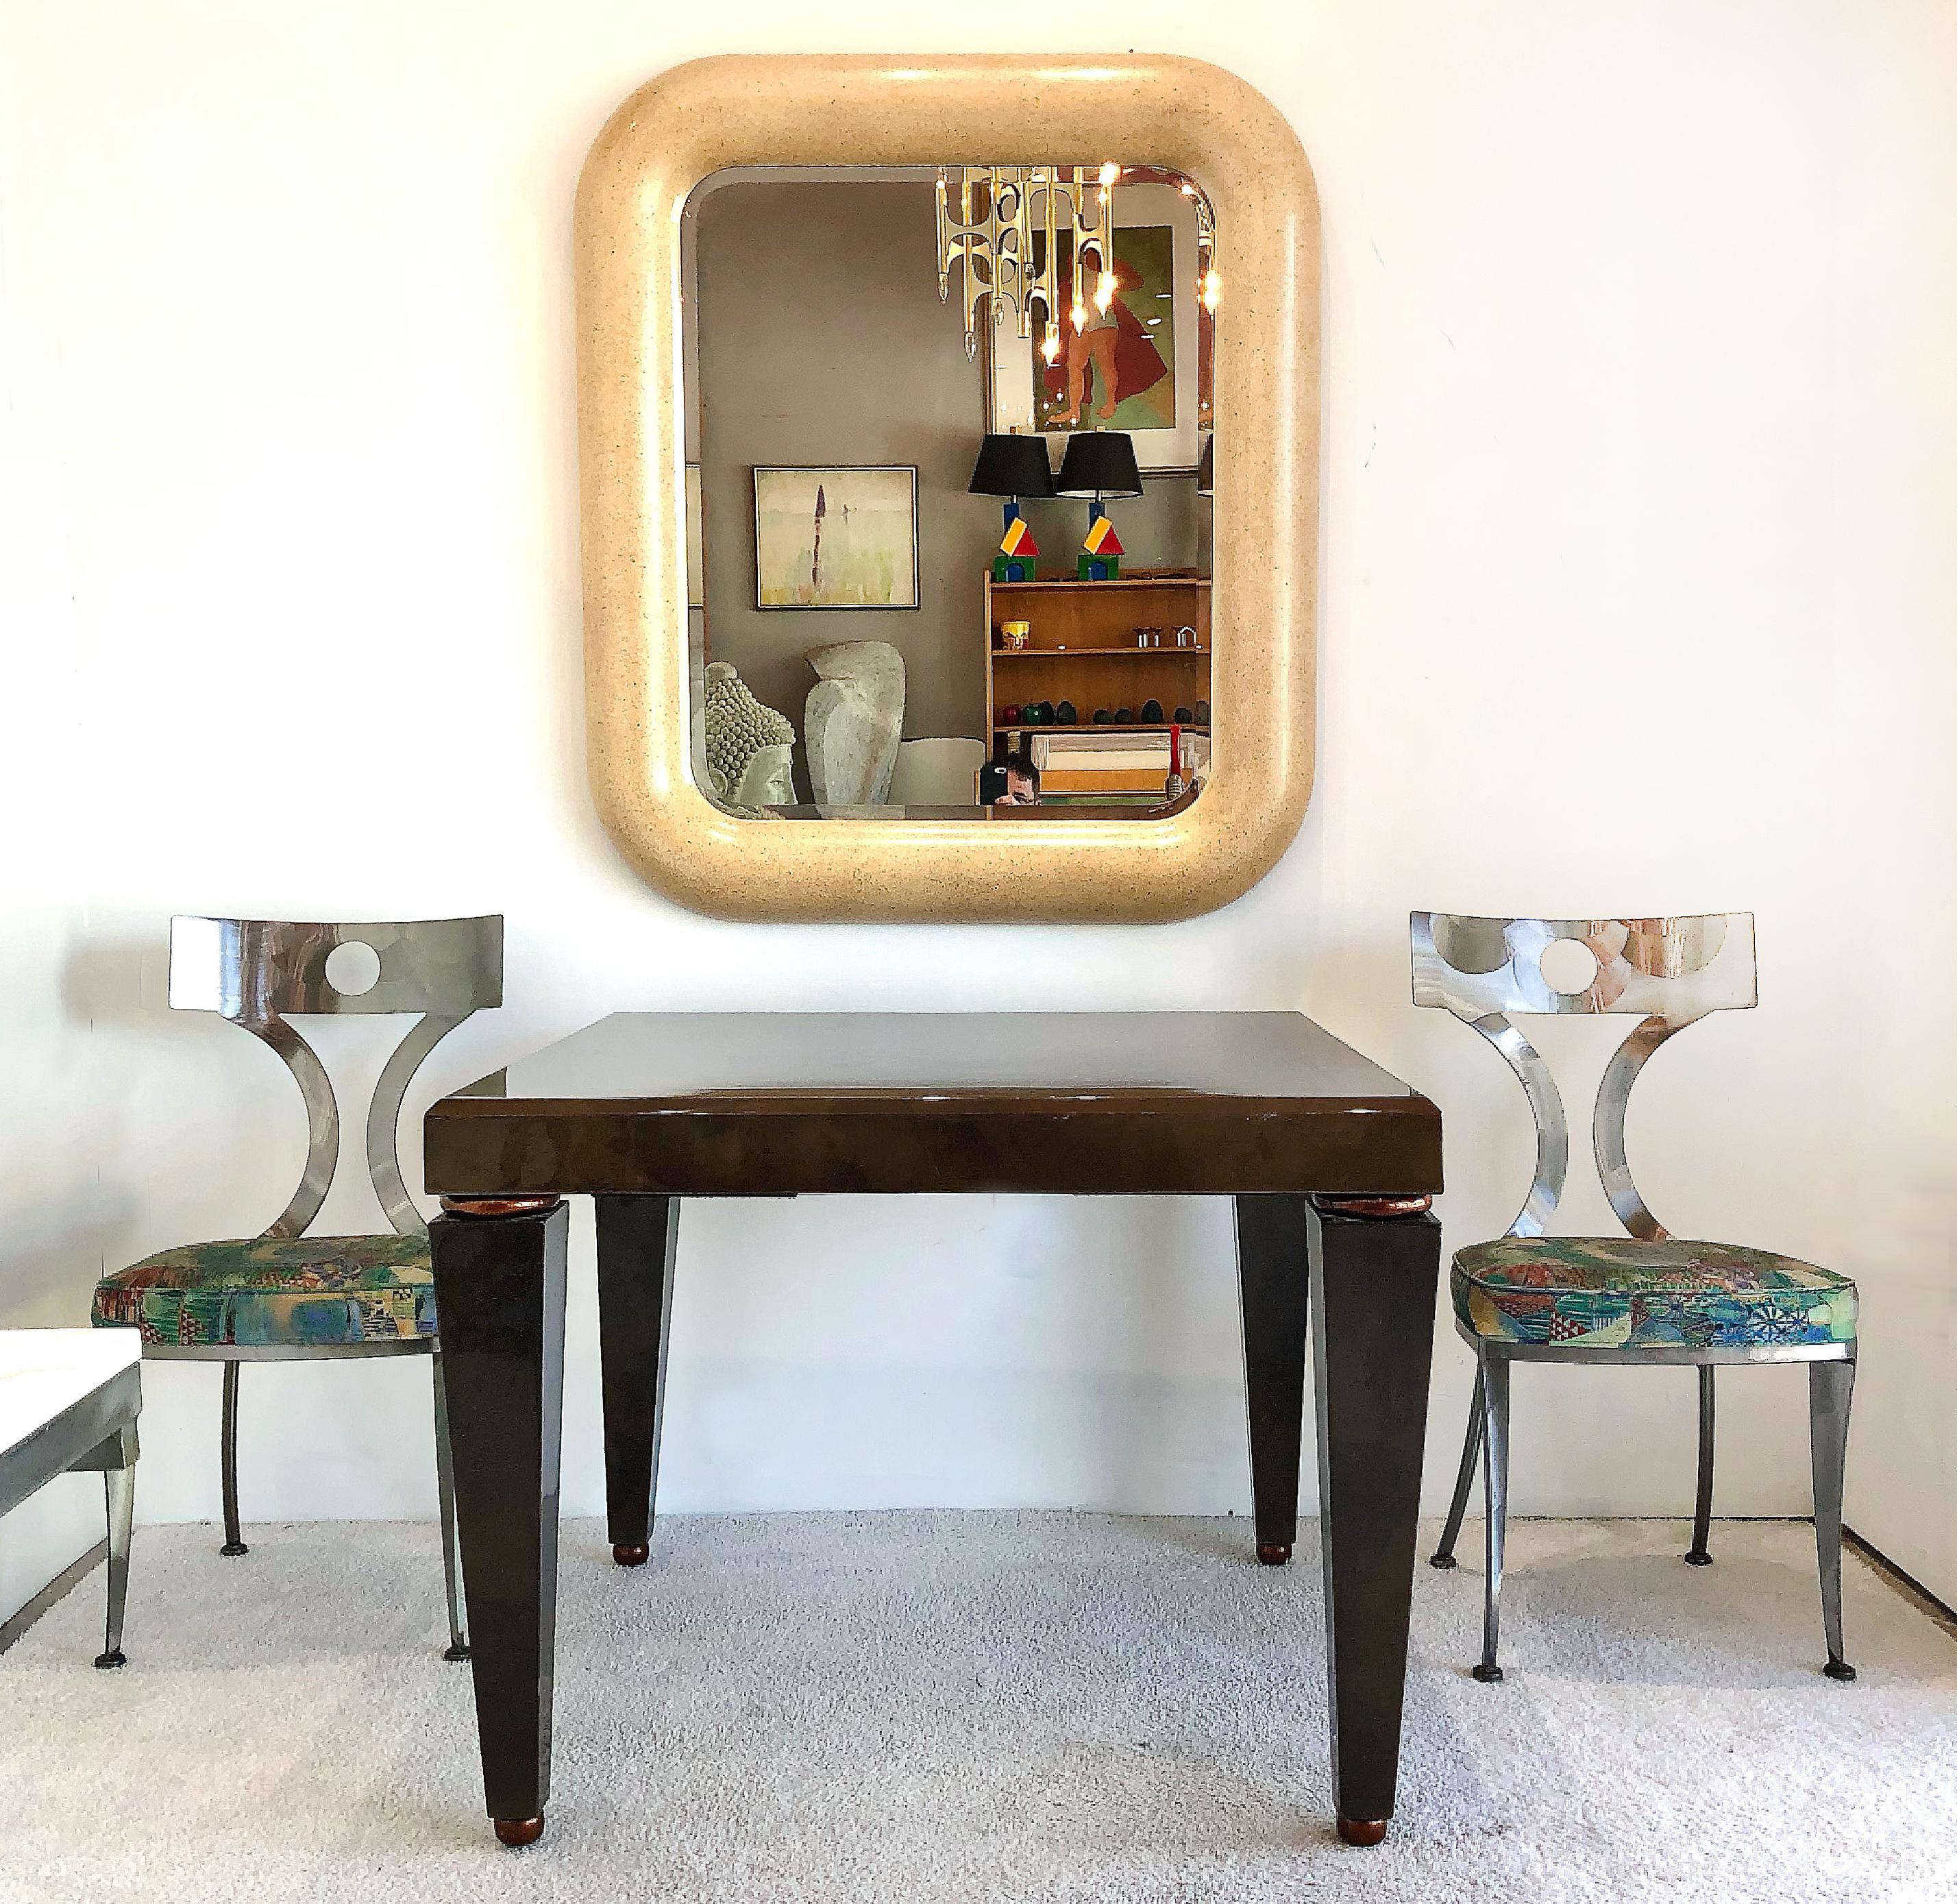 1980s faux goatskin mirror by Henredon after Springer

Offered for sale is a 1980s faux goatskin mirror from Henredon that is created in the Karl Springer style. The piece is quite substantial with great weight and has a beveled mirror with